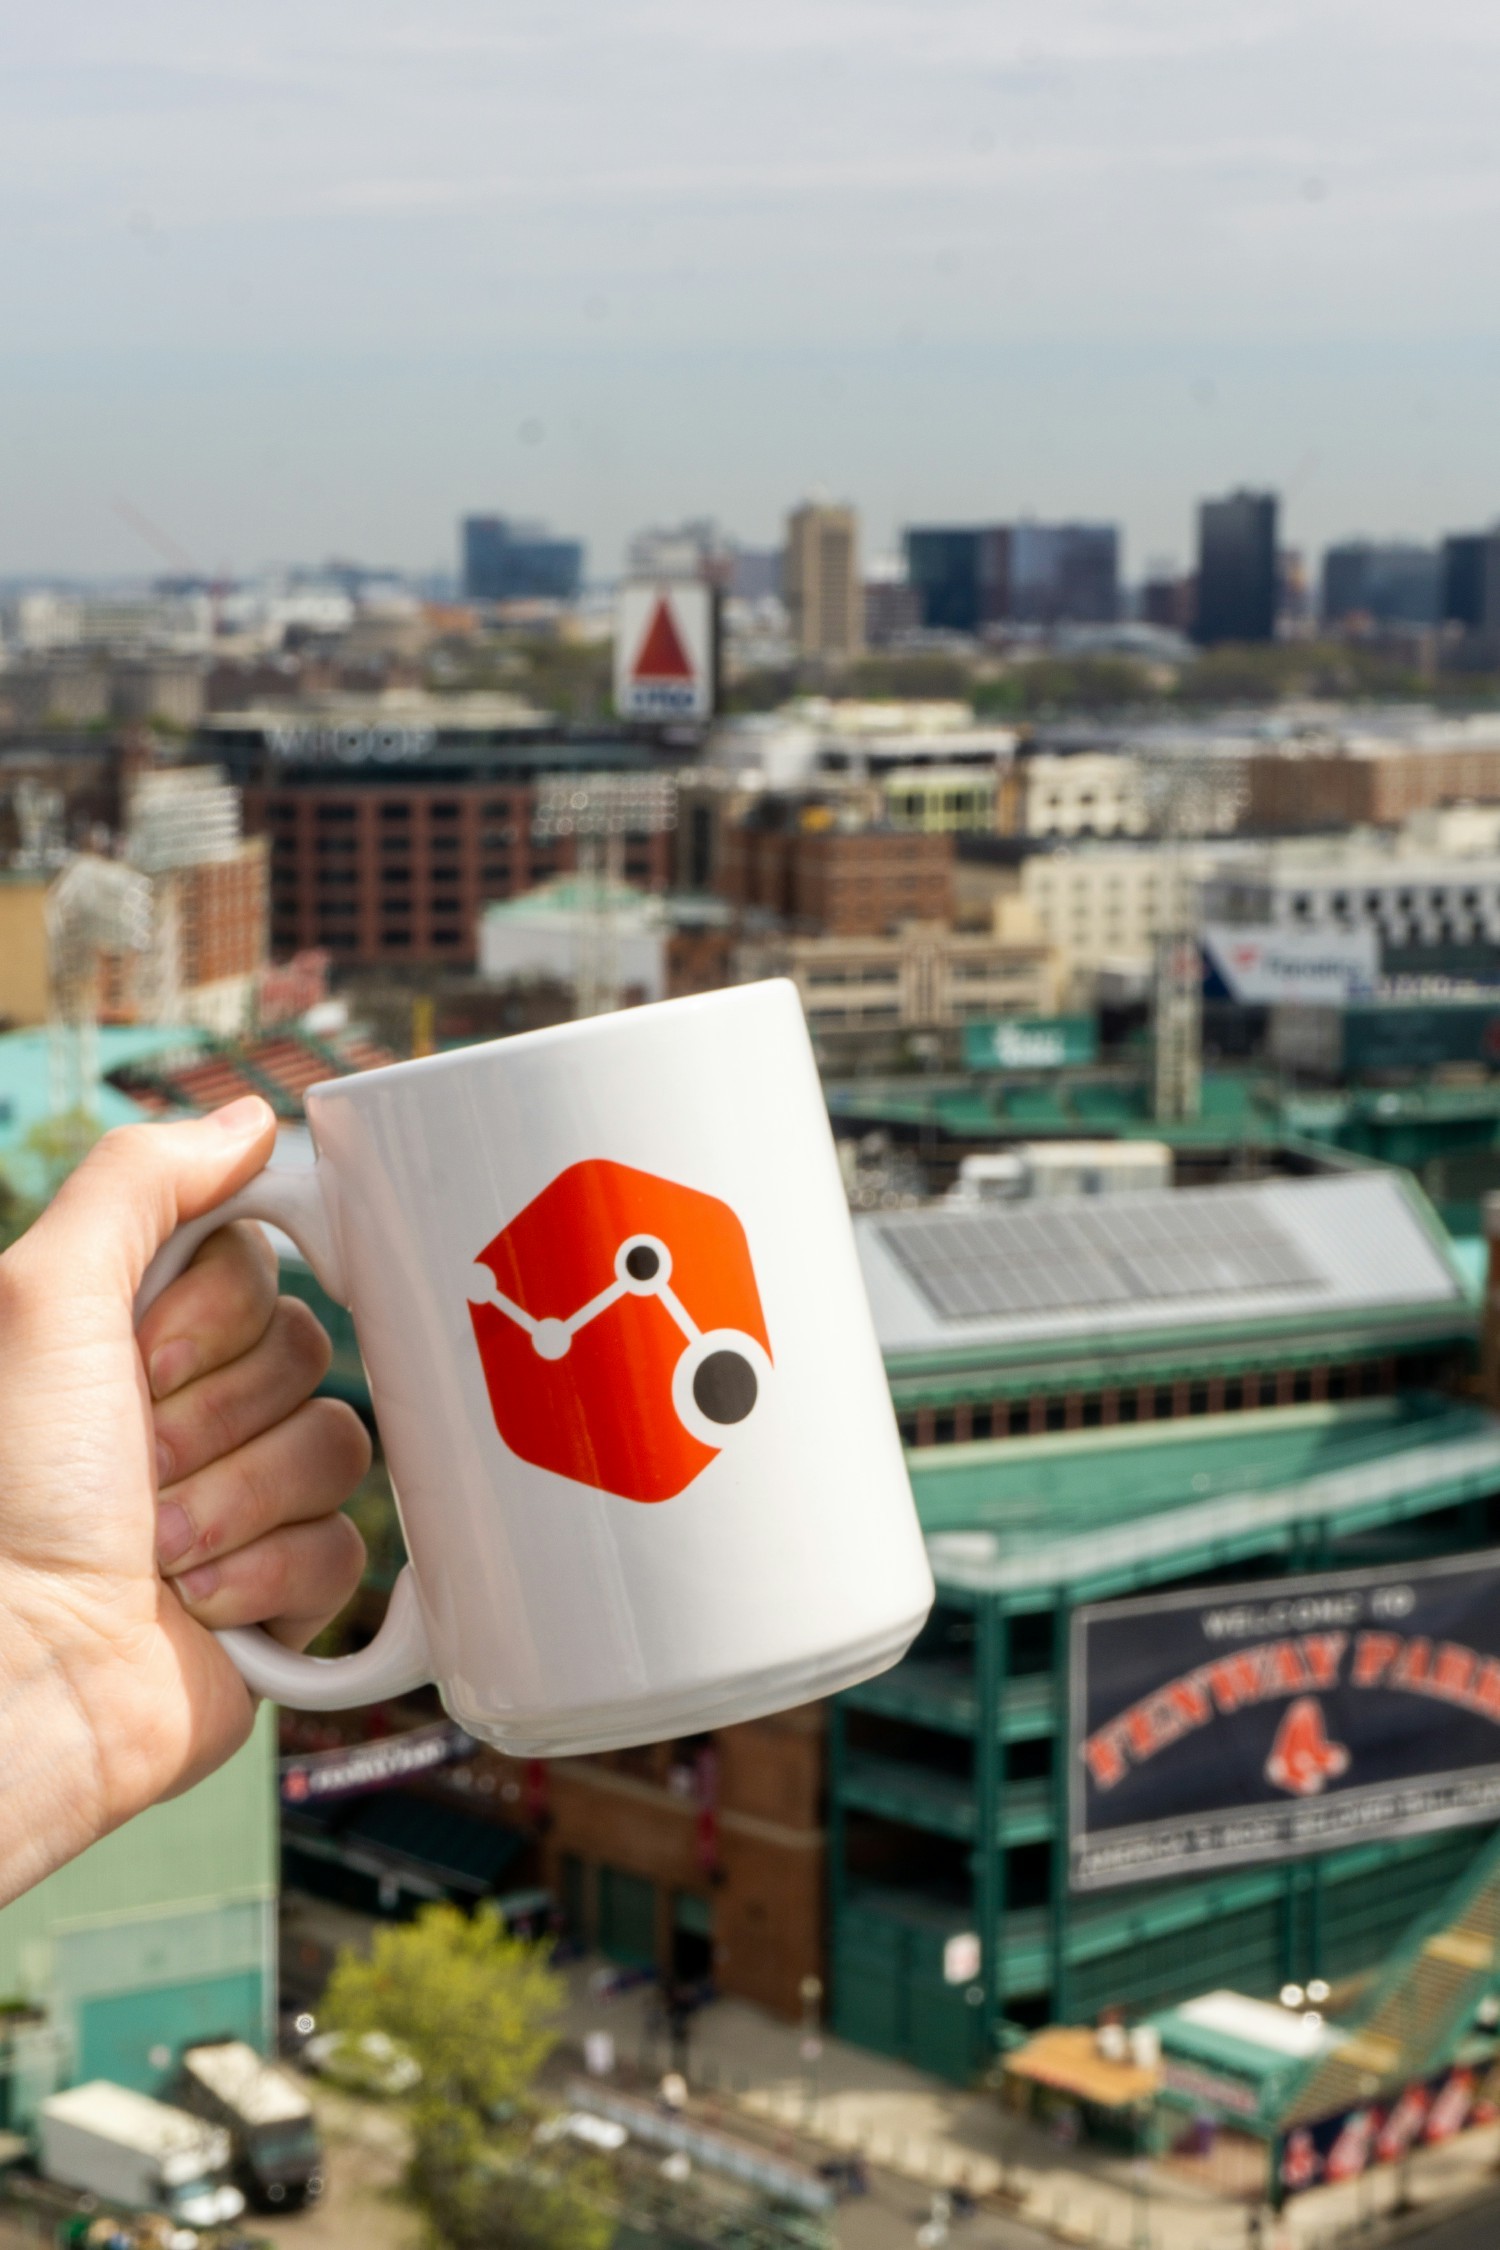 PathAI's Boston Headquarters is located right in the heart of Fenway.